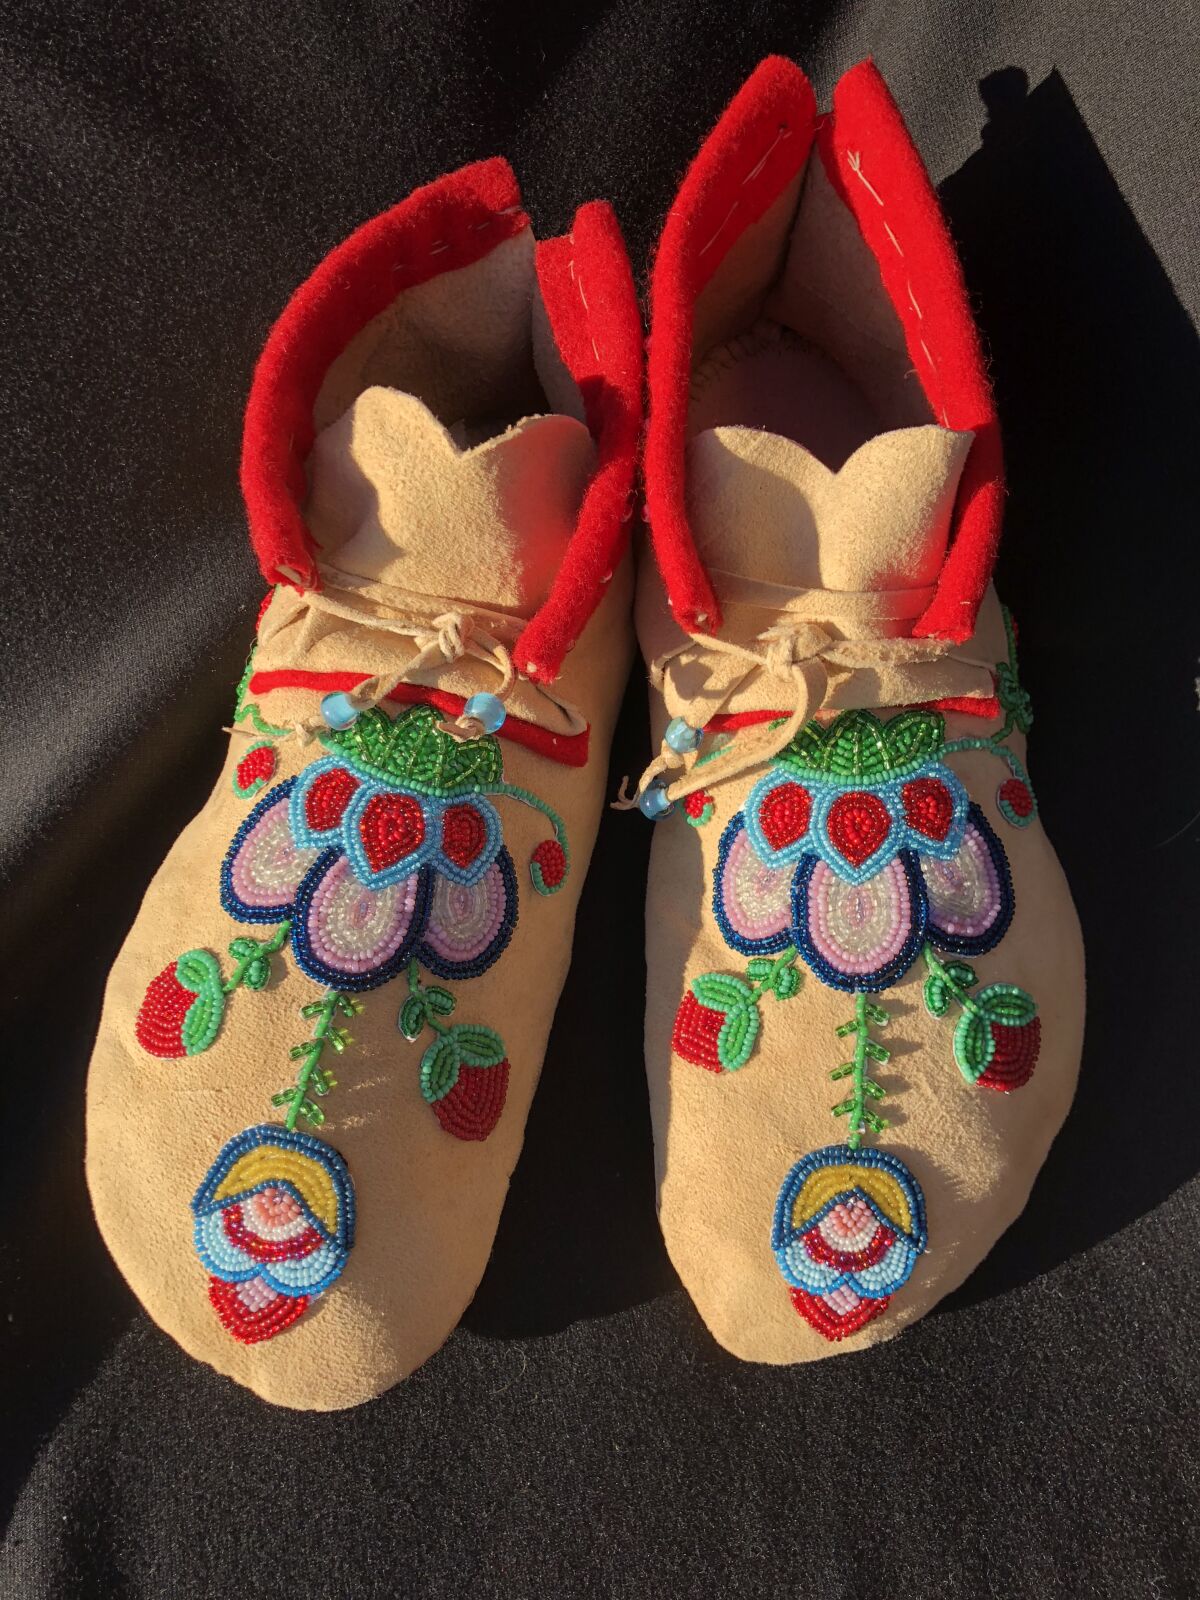 Two buckskin moccasins, hand-beaded with ornate red, pink, blue, white and yellow flowers.